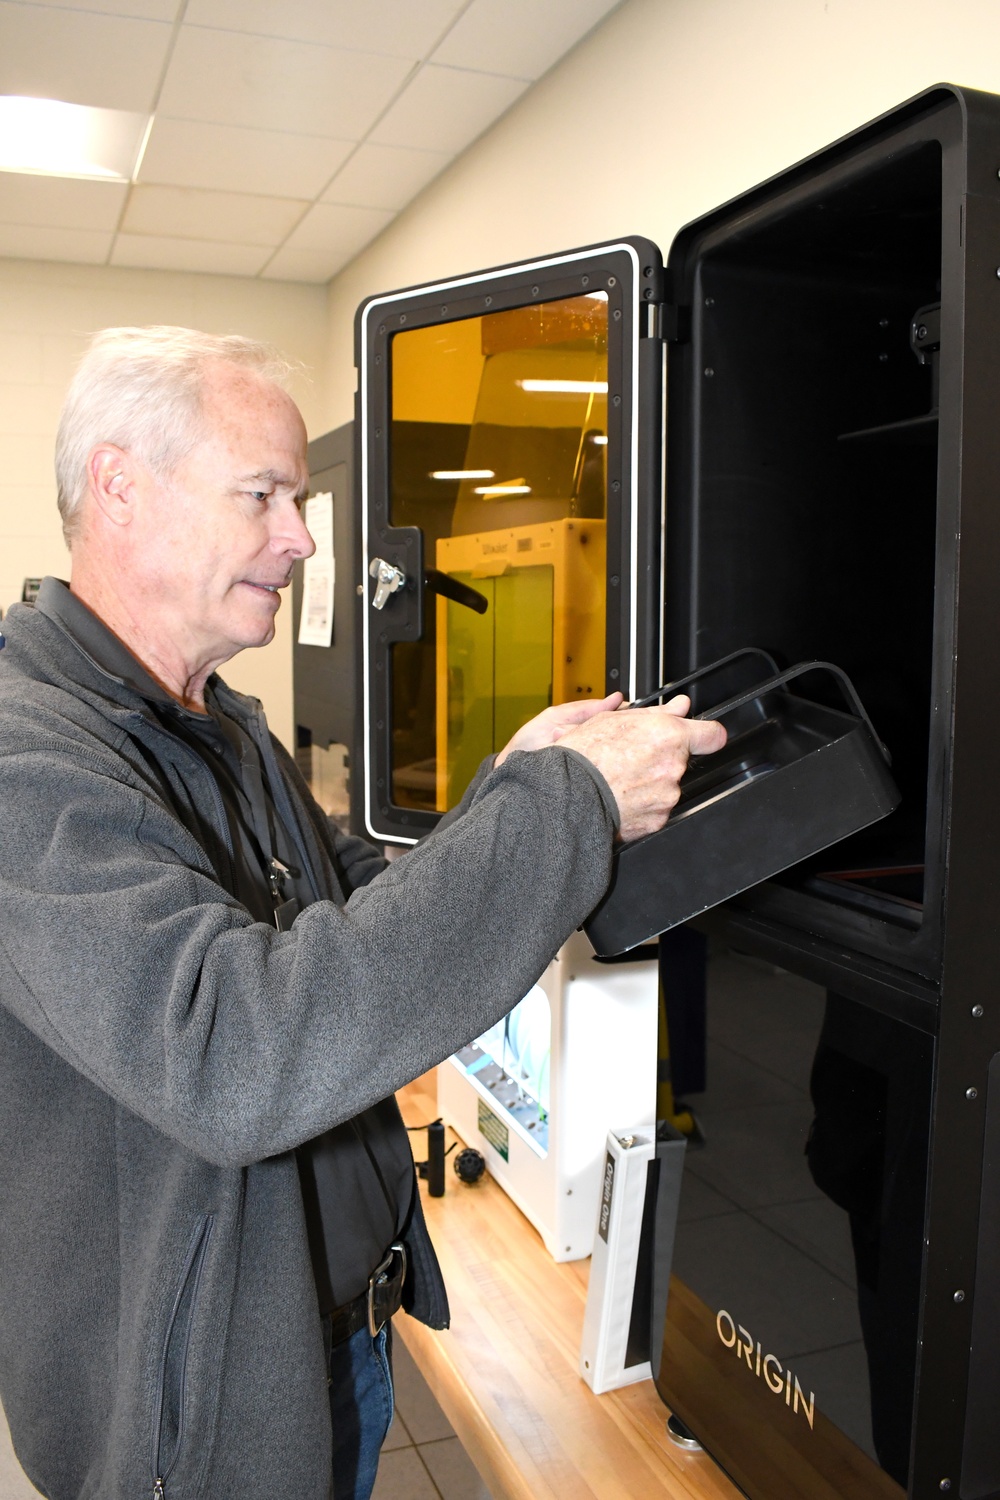 Upgrades provide expanded capabilities at FRCE Innovation Lab